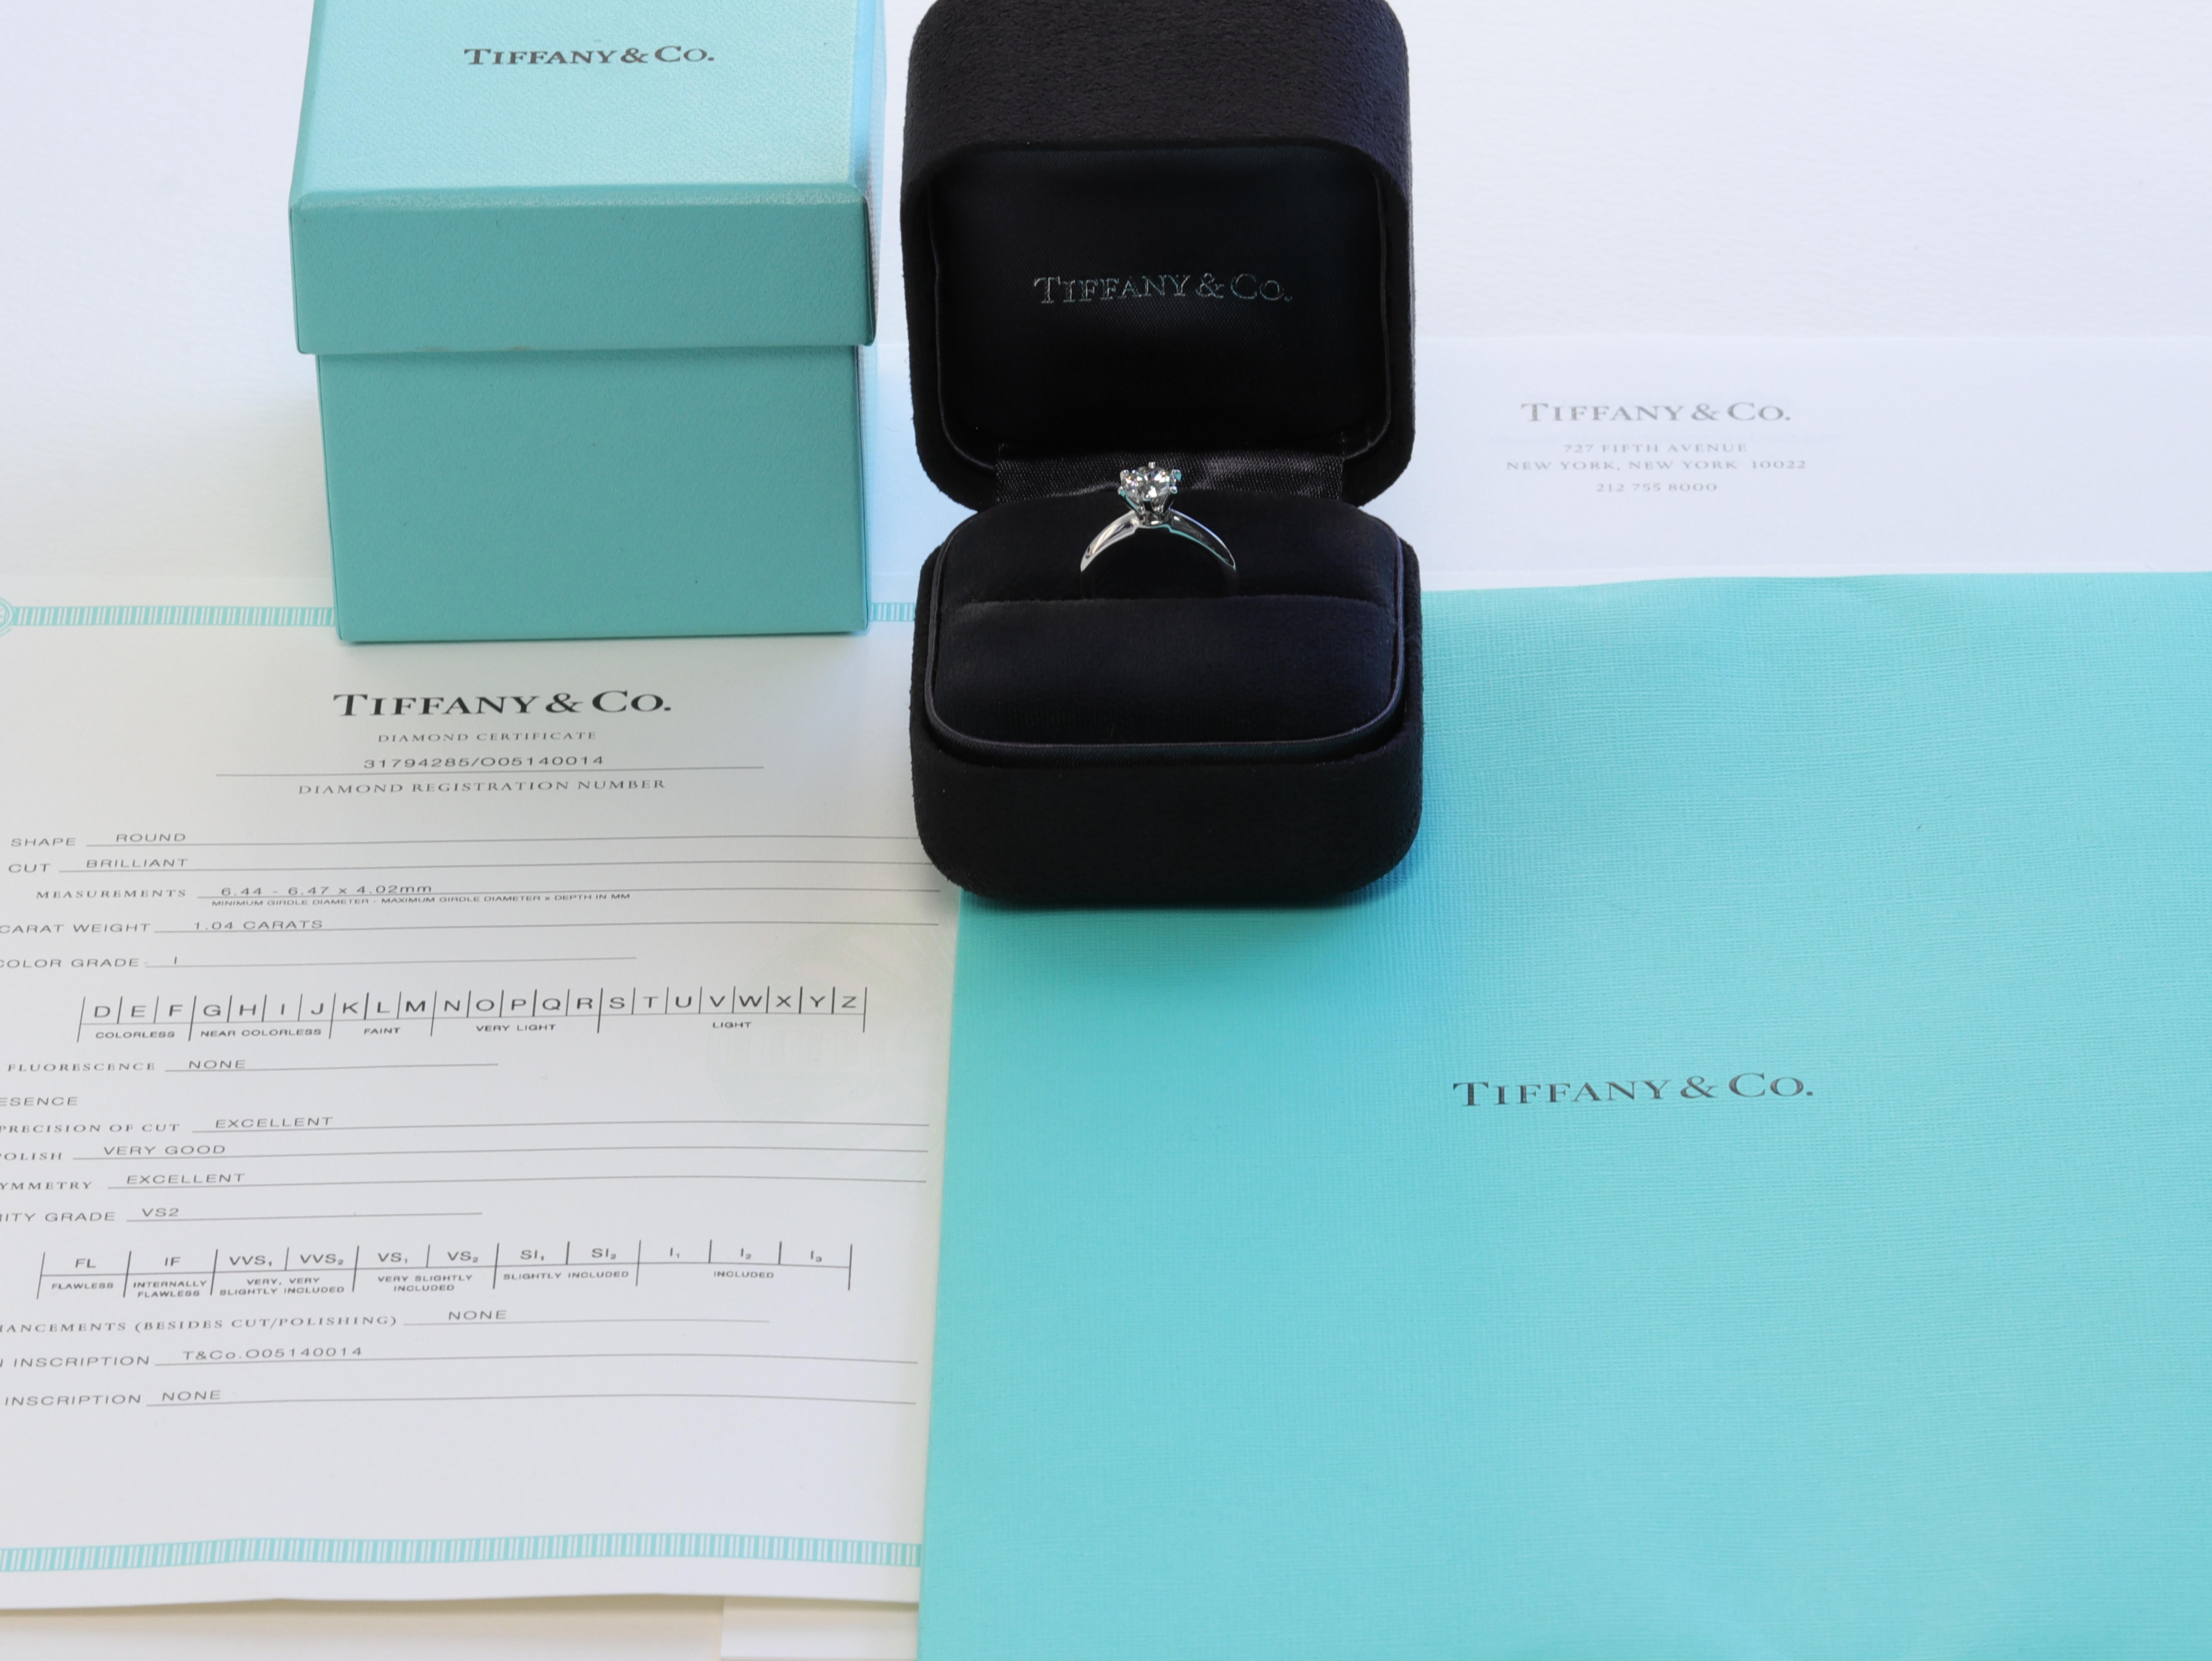 The ring is accompanied by the original inside and outside boxes, original diamond certificate and valuation report from Tiffany & Co. 

This classic Tiffany & Co. solitaire diamond engagement ring features a 1.04 carat round brilliant cut diamond